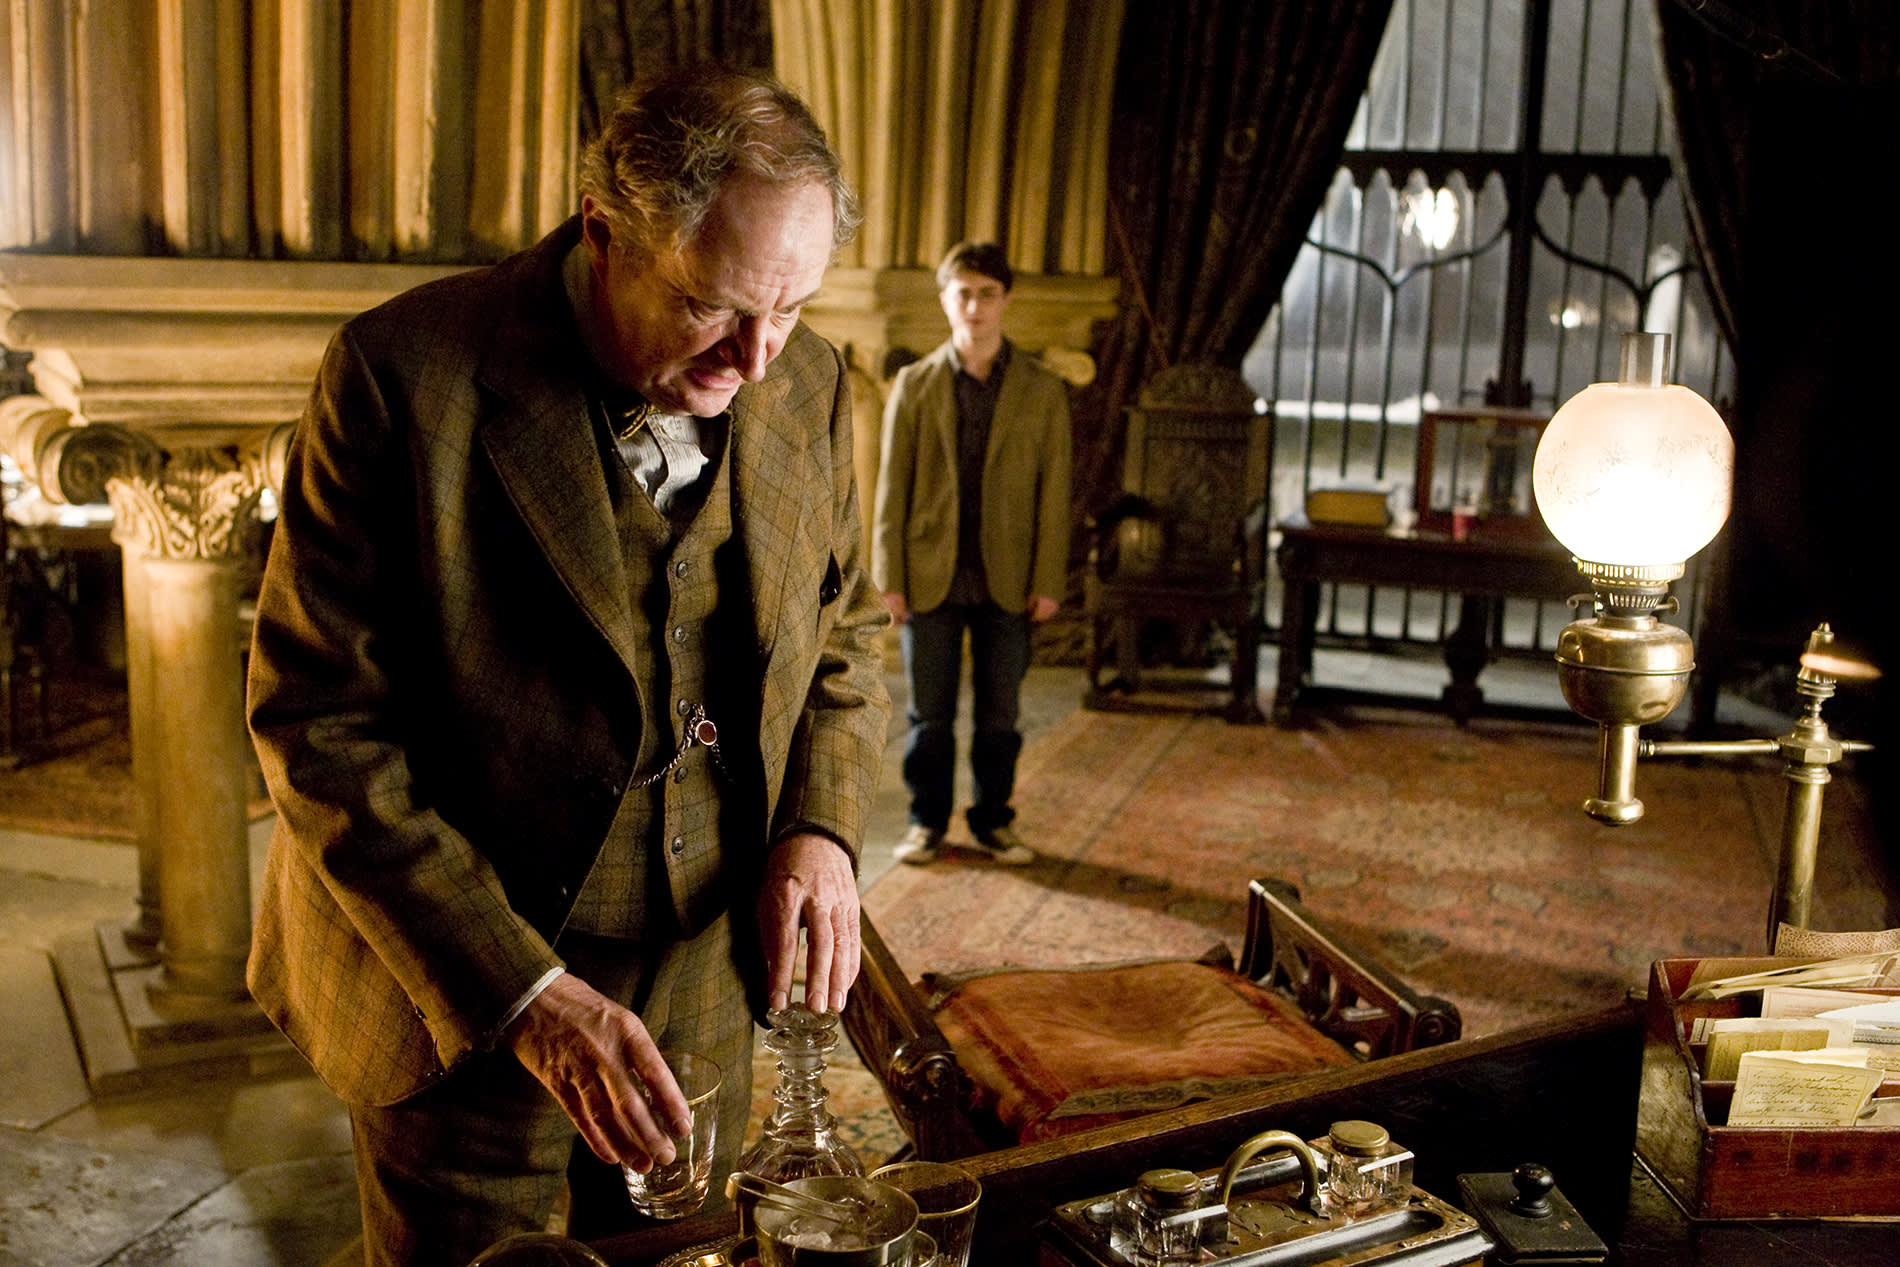 WB-HP-f6-slughorn-examining-potions-while-harry-looks-on-web-landscape